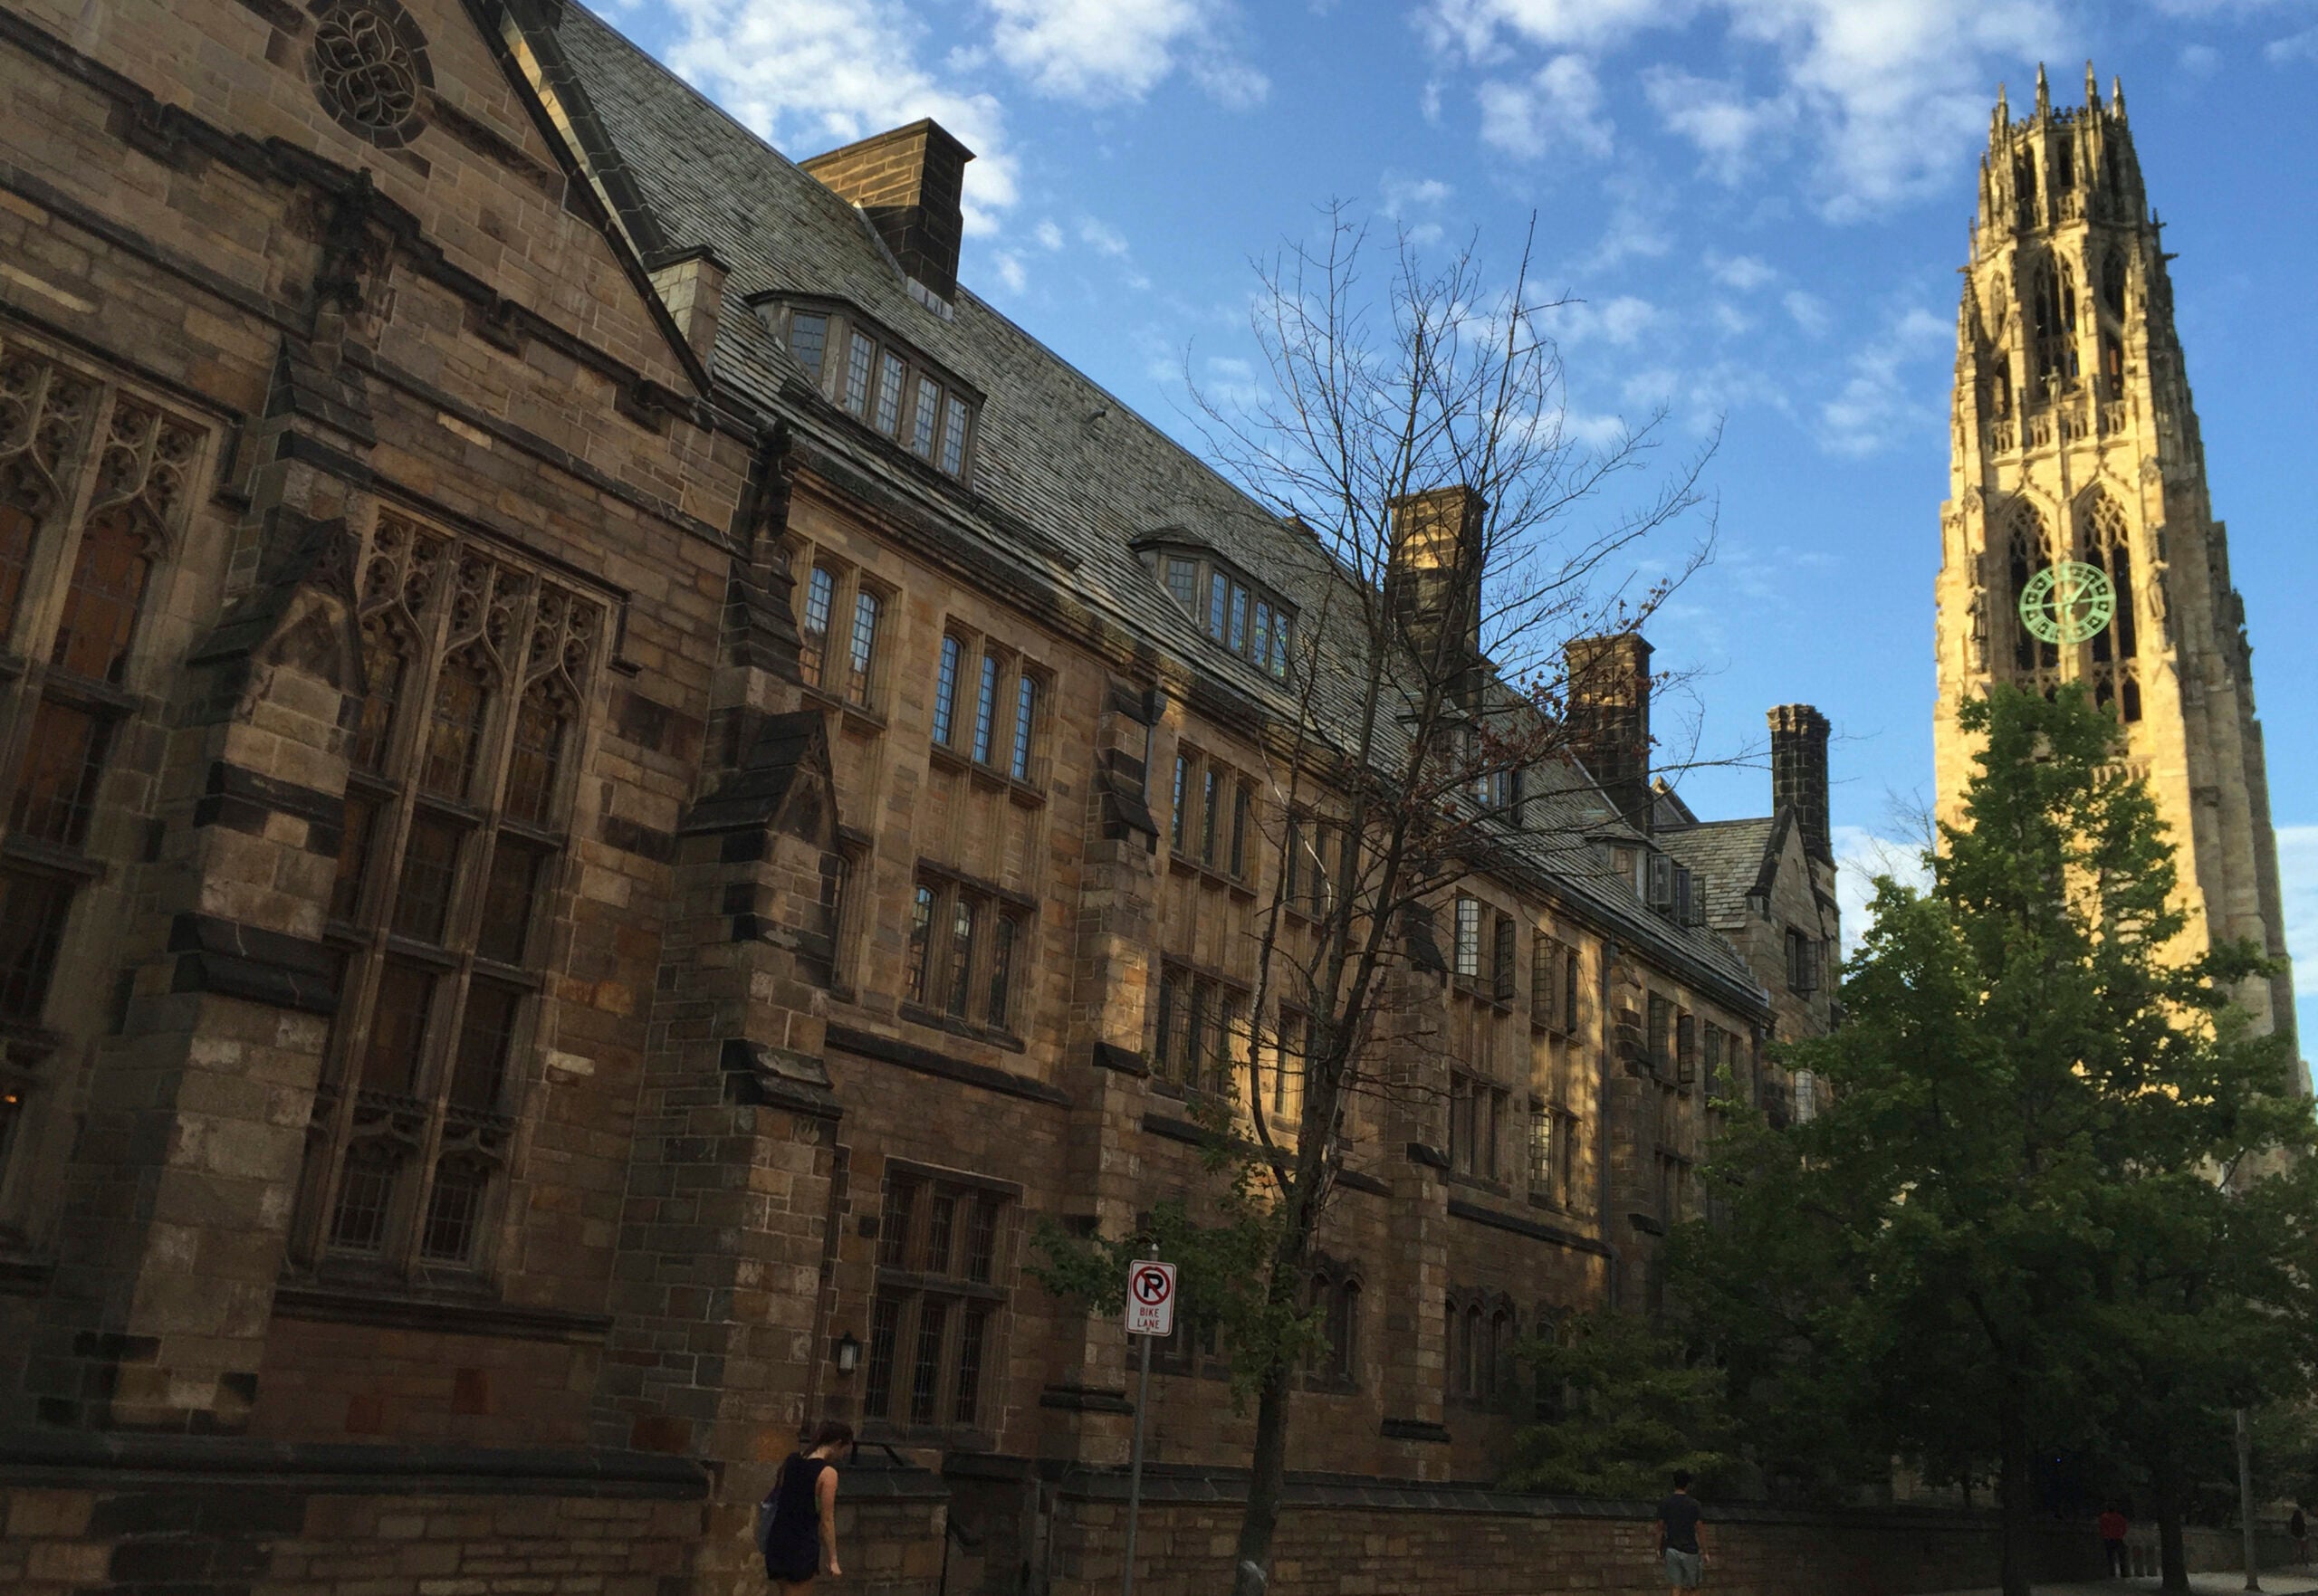 A building at Yale